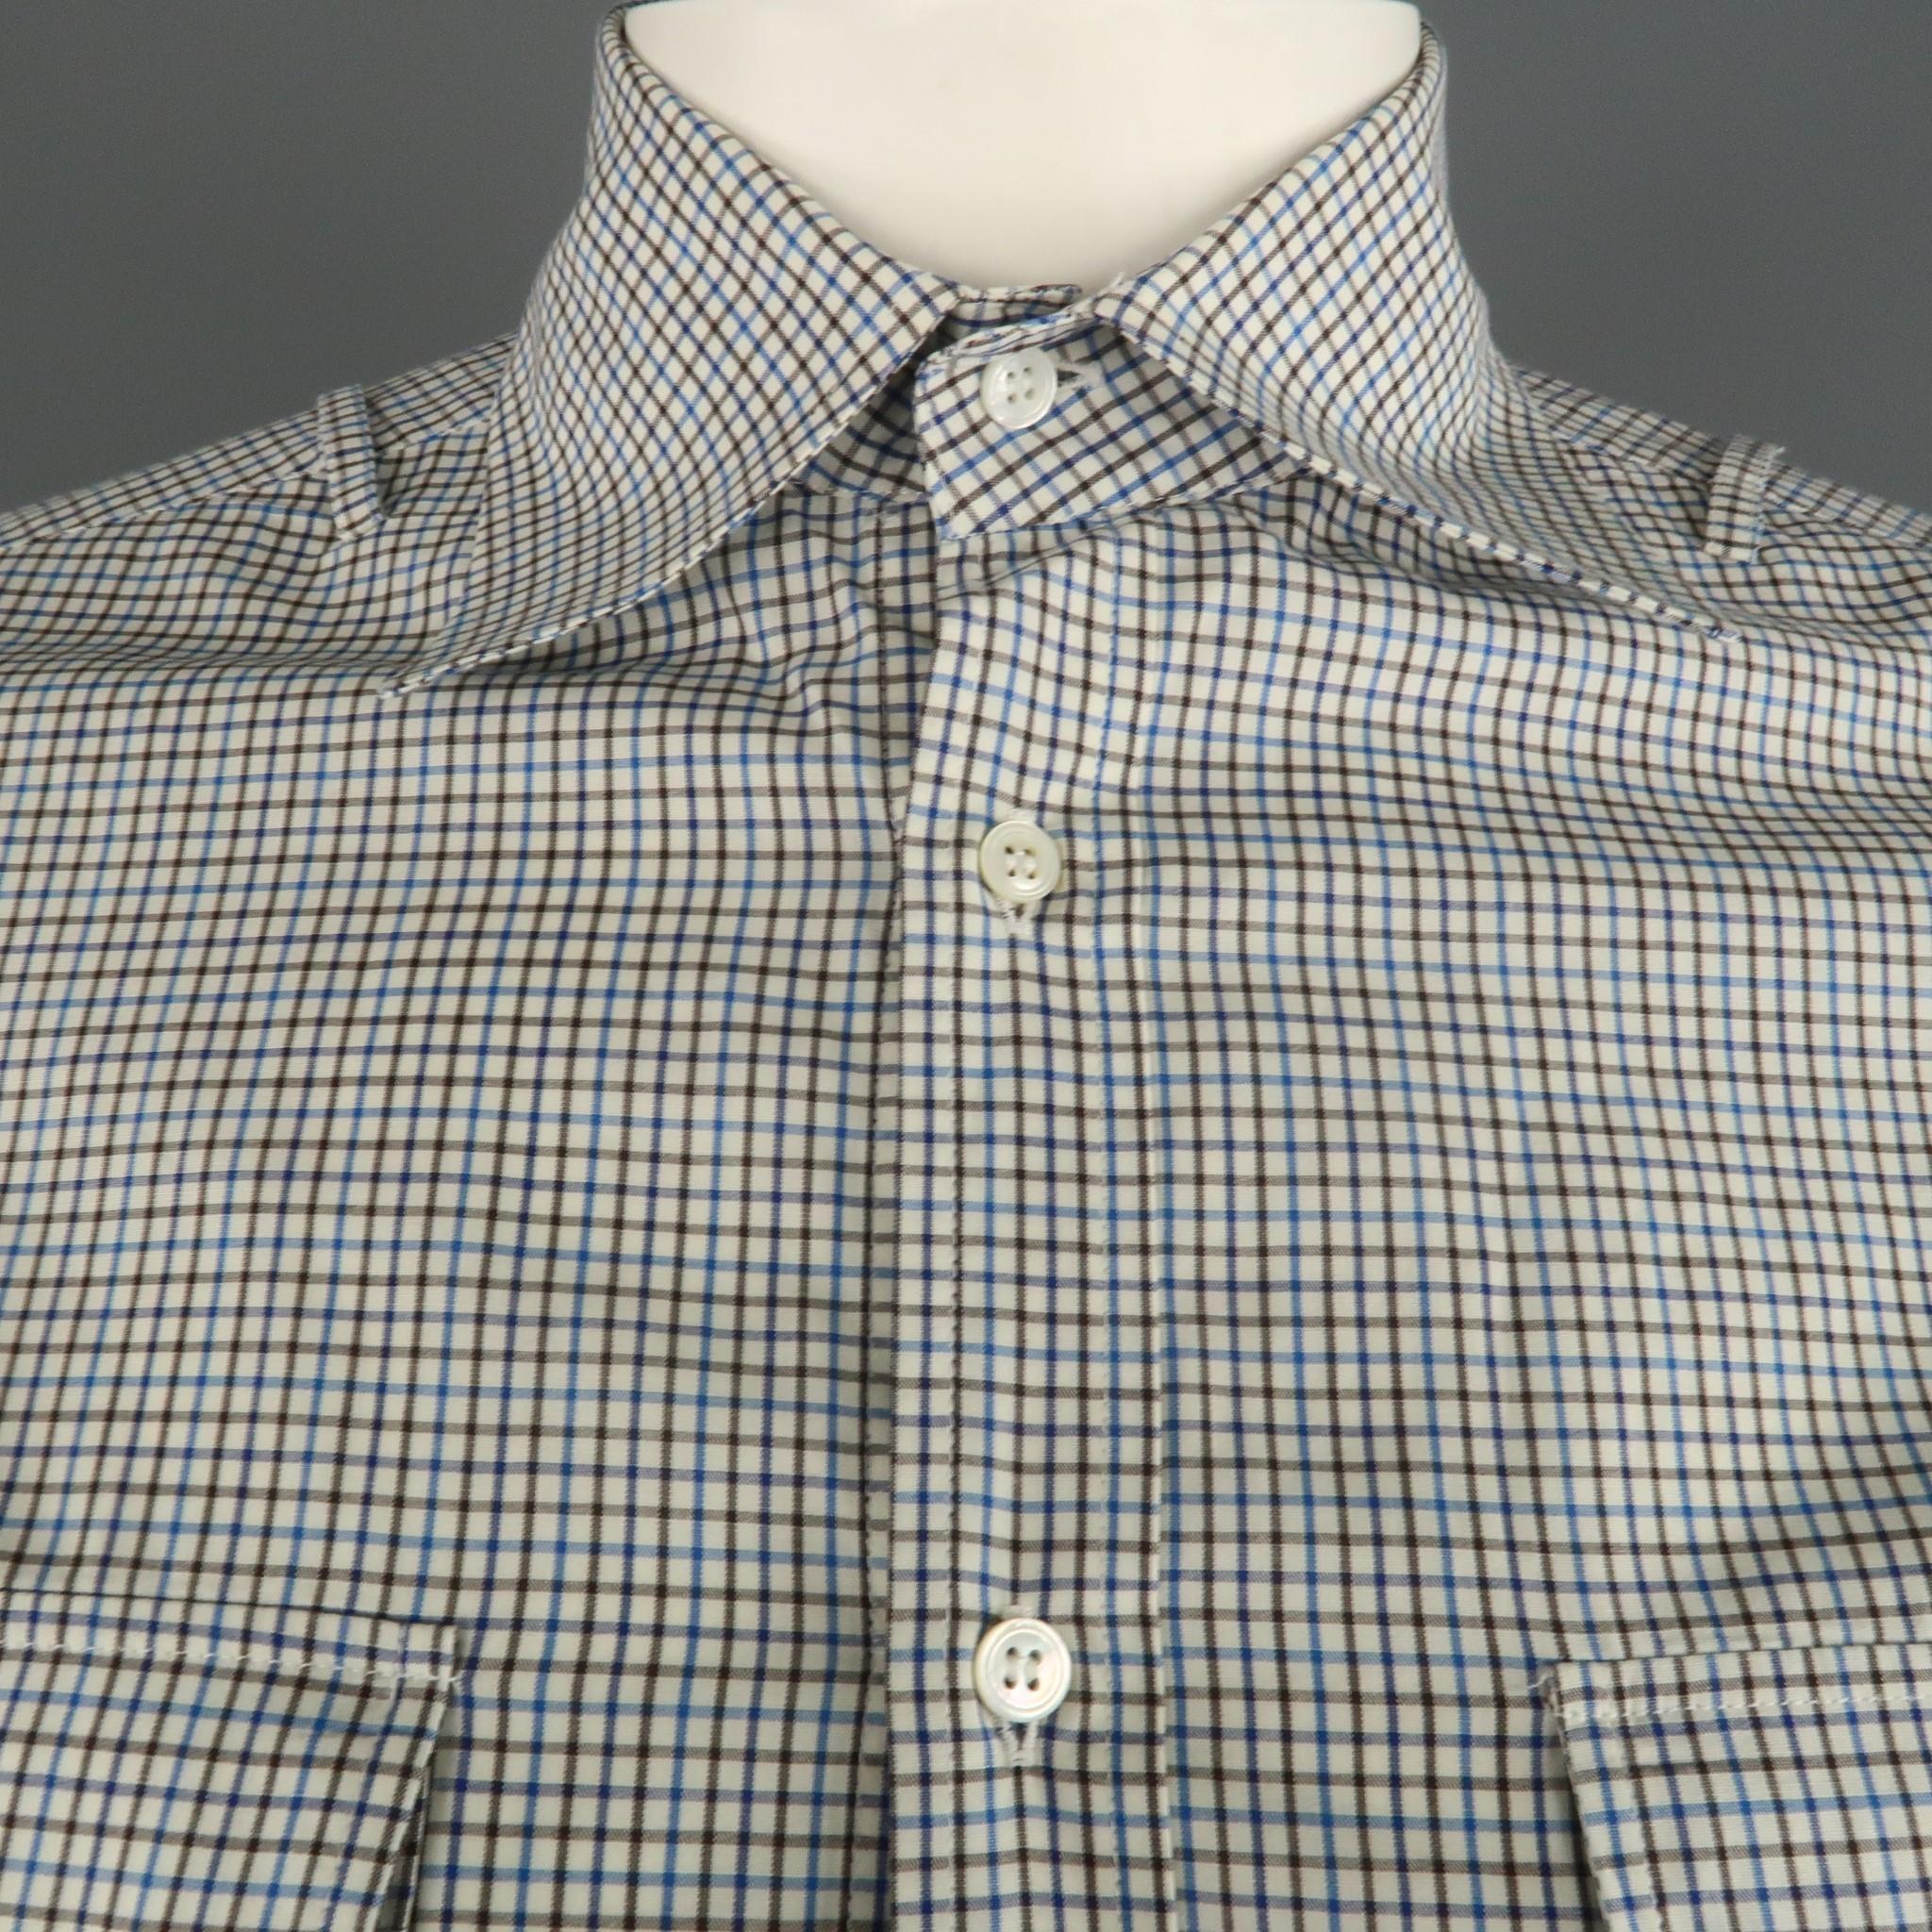 MICHAEL BASTIAN lone sleeve shirt comes in a blue and brown plaid featuring a spread collar and front patch pockets. Made in Italy
 
Excellent Pre-Owned Condition.
Marked: 39/15.5
 
Measurements:
 
Shoulder: 18.5 in.
Chest: 40 in.
Sleeve: 28